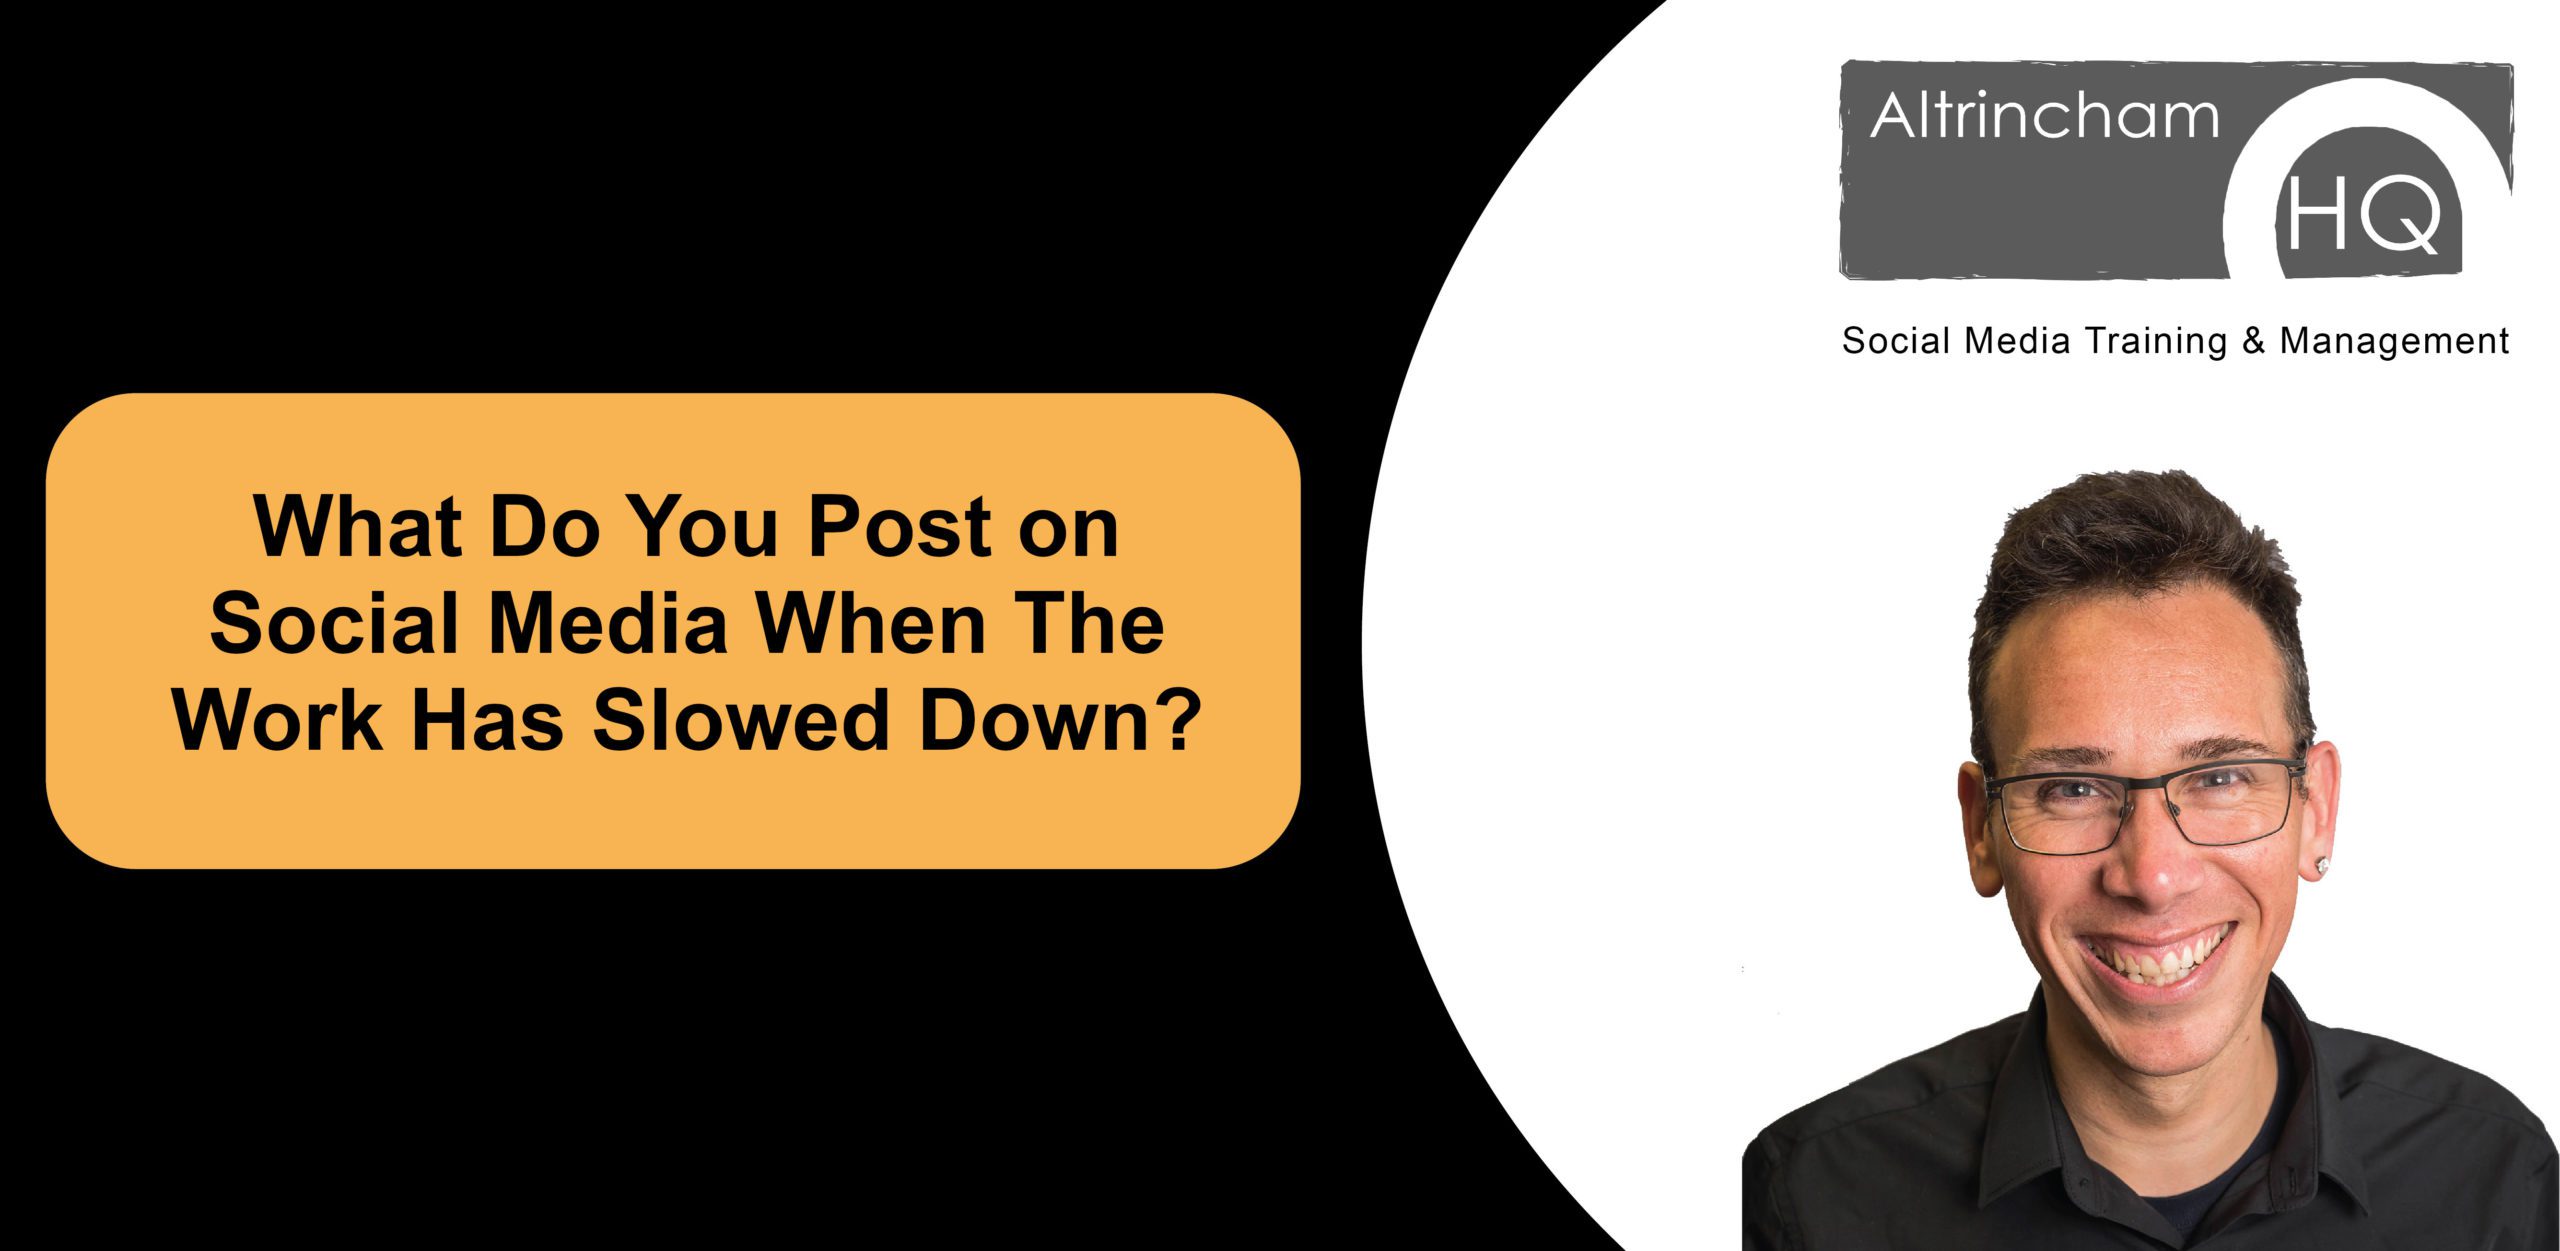 What Do You Post on Social Media When The Work Has Slowed Down?